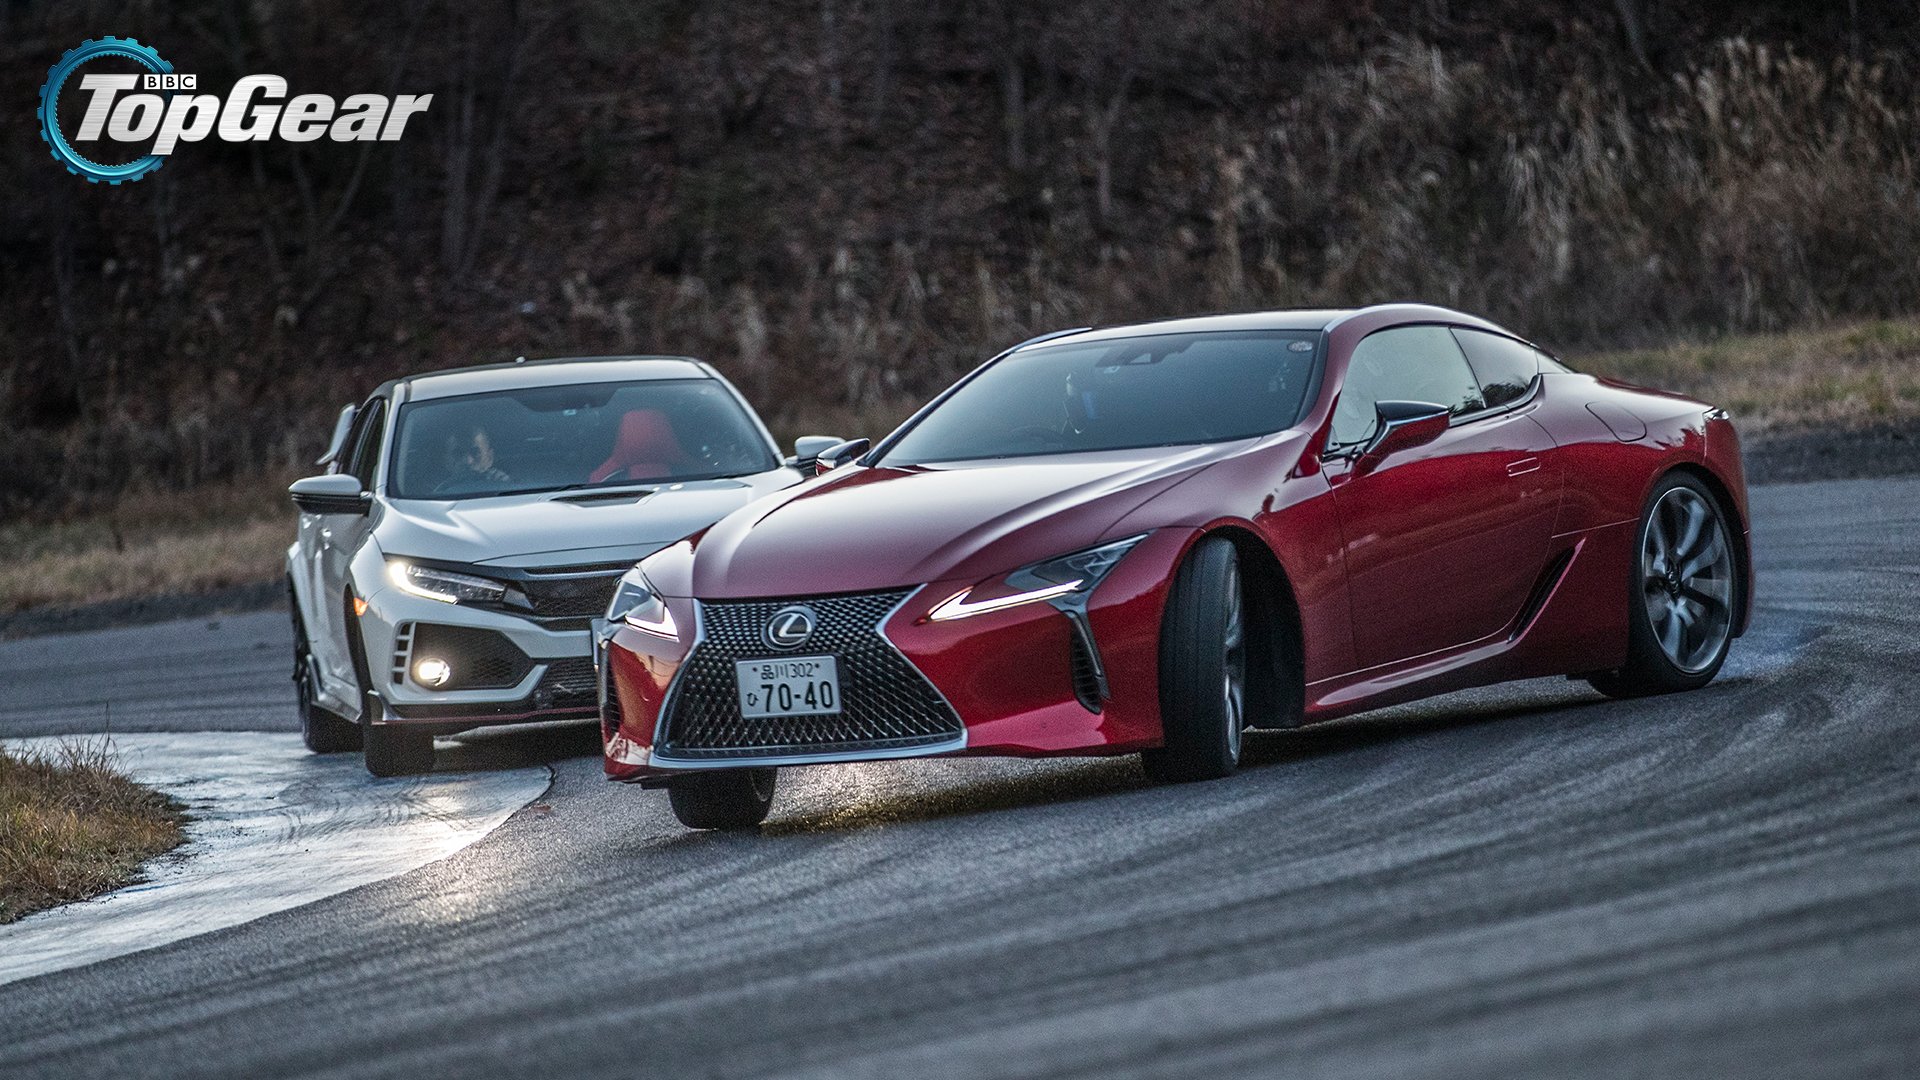 Top Gear on Twitter: "#TopGear episode 3. Destination: #Japan. First up, it's #Lexus LC500 vs #Honda Civic R: but FWD or RWD take the crown? https://t.co/YnrJlOPkDL" / Twitter